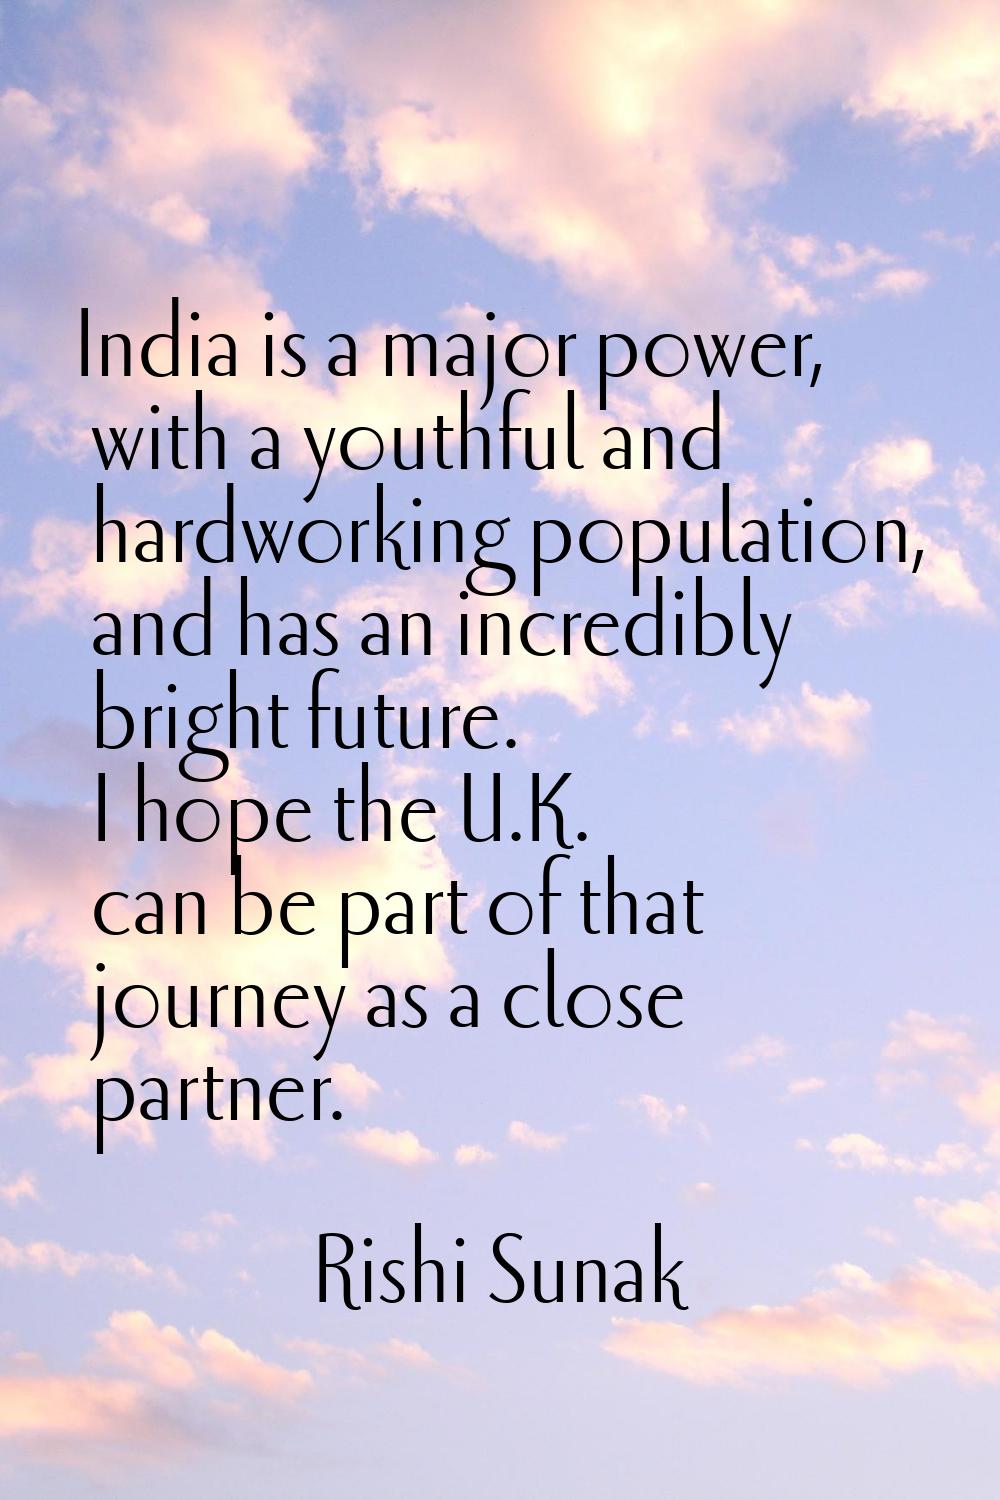 India is a major power, with a youthful and hardworking population, and has an incredibly bright fu